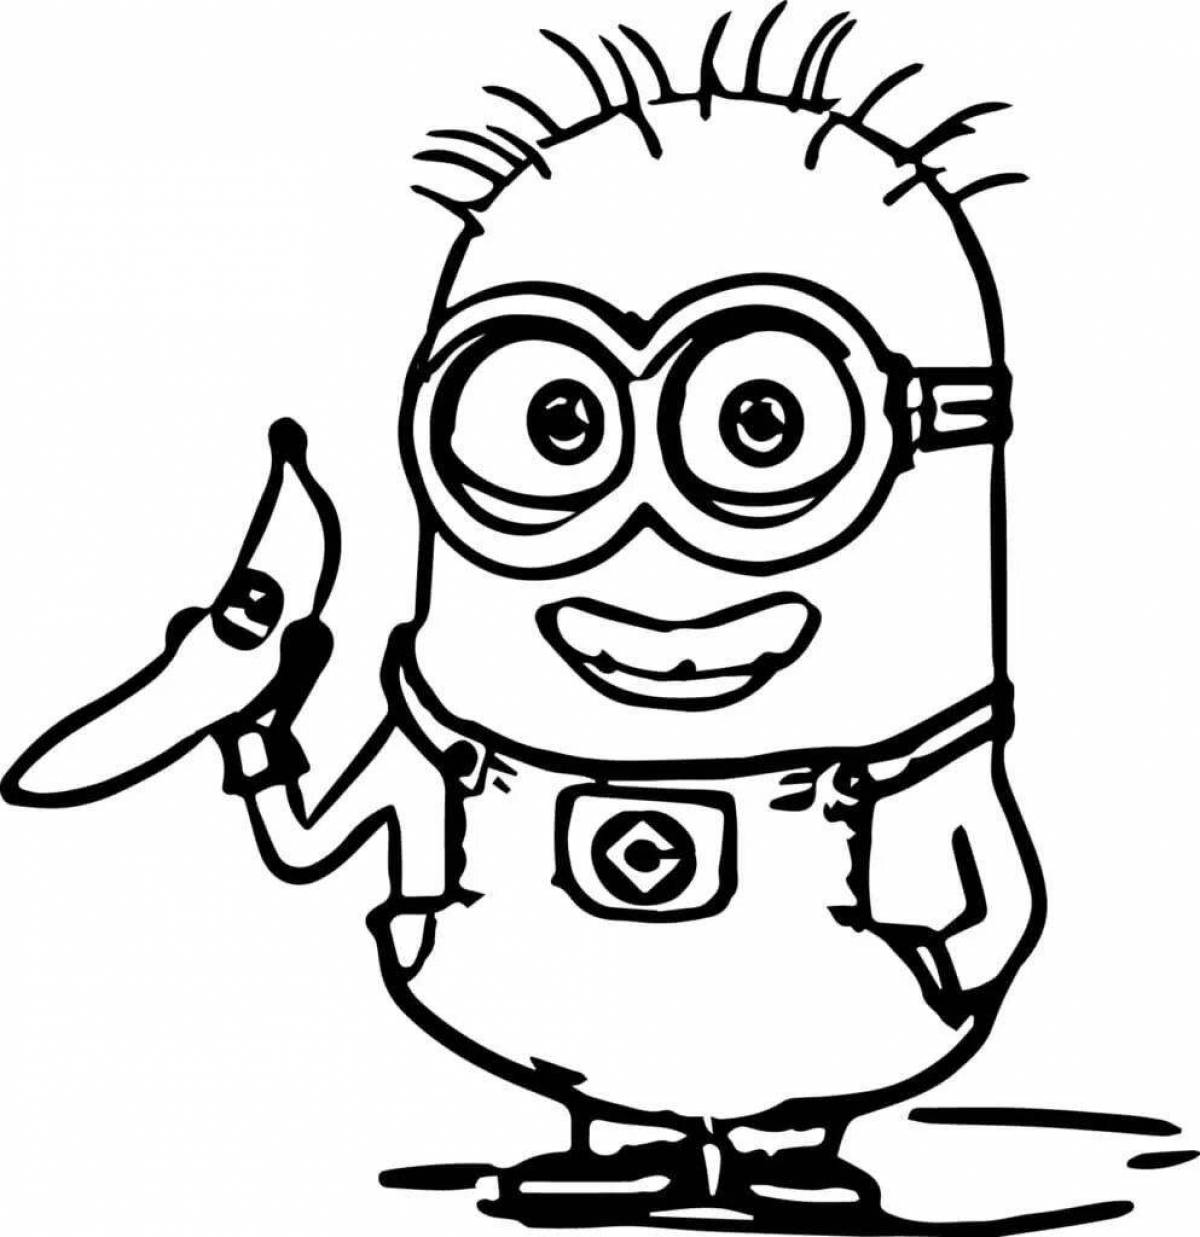 Minion awesome coloring pages